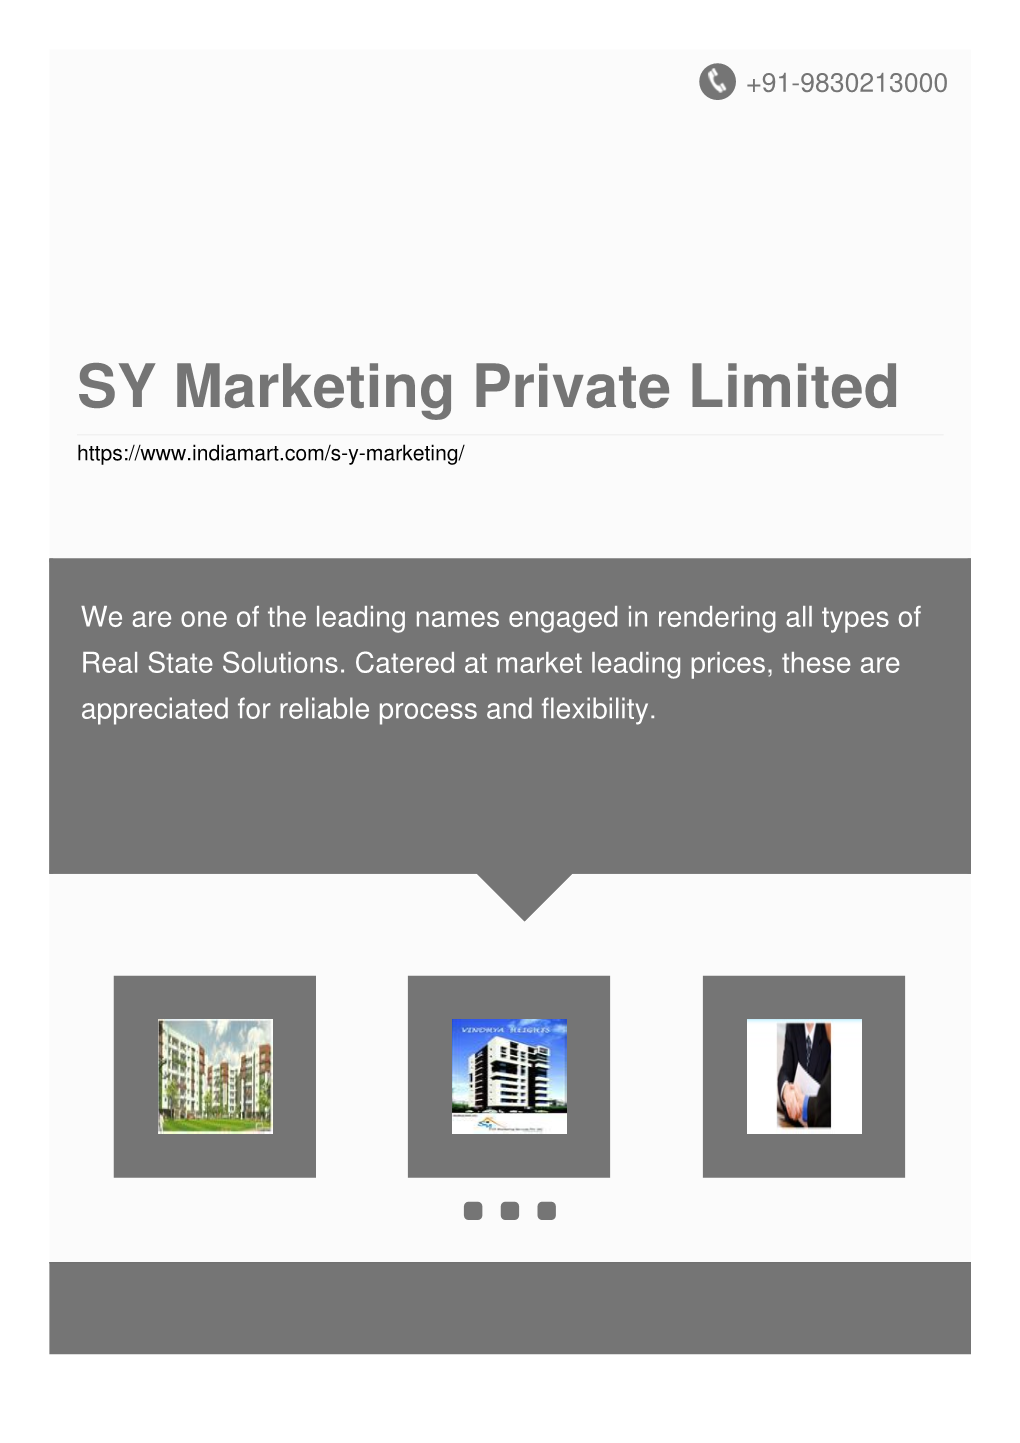 SY Marketing Private Limited